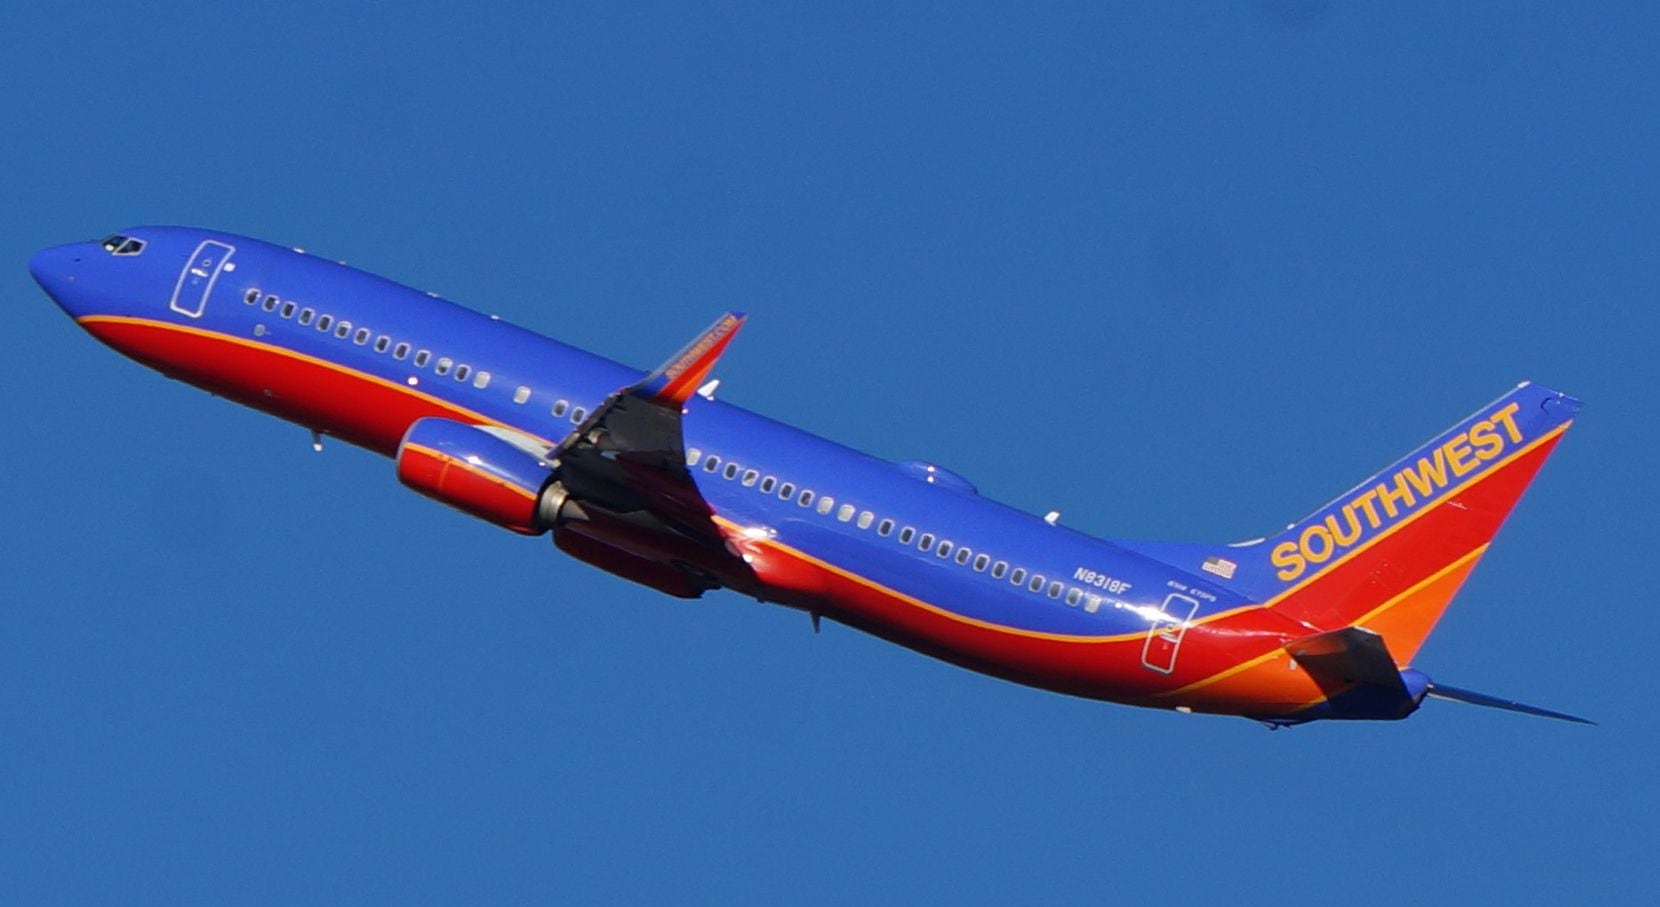  A Southwest Airlines' Boeing 737-800 jet takes off from Dallas Love Field.